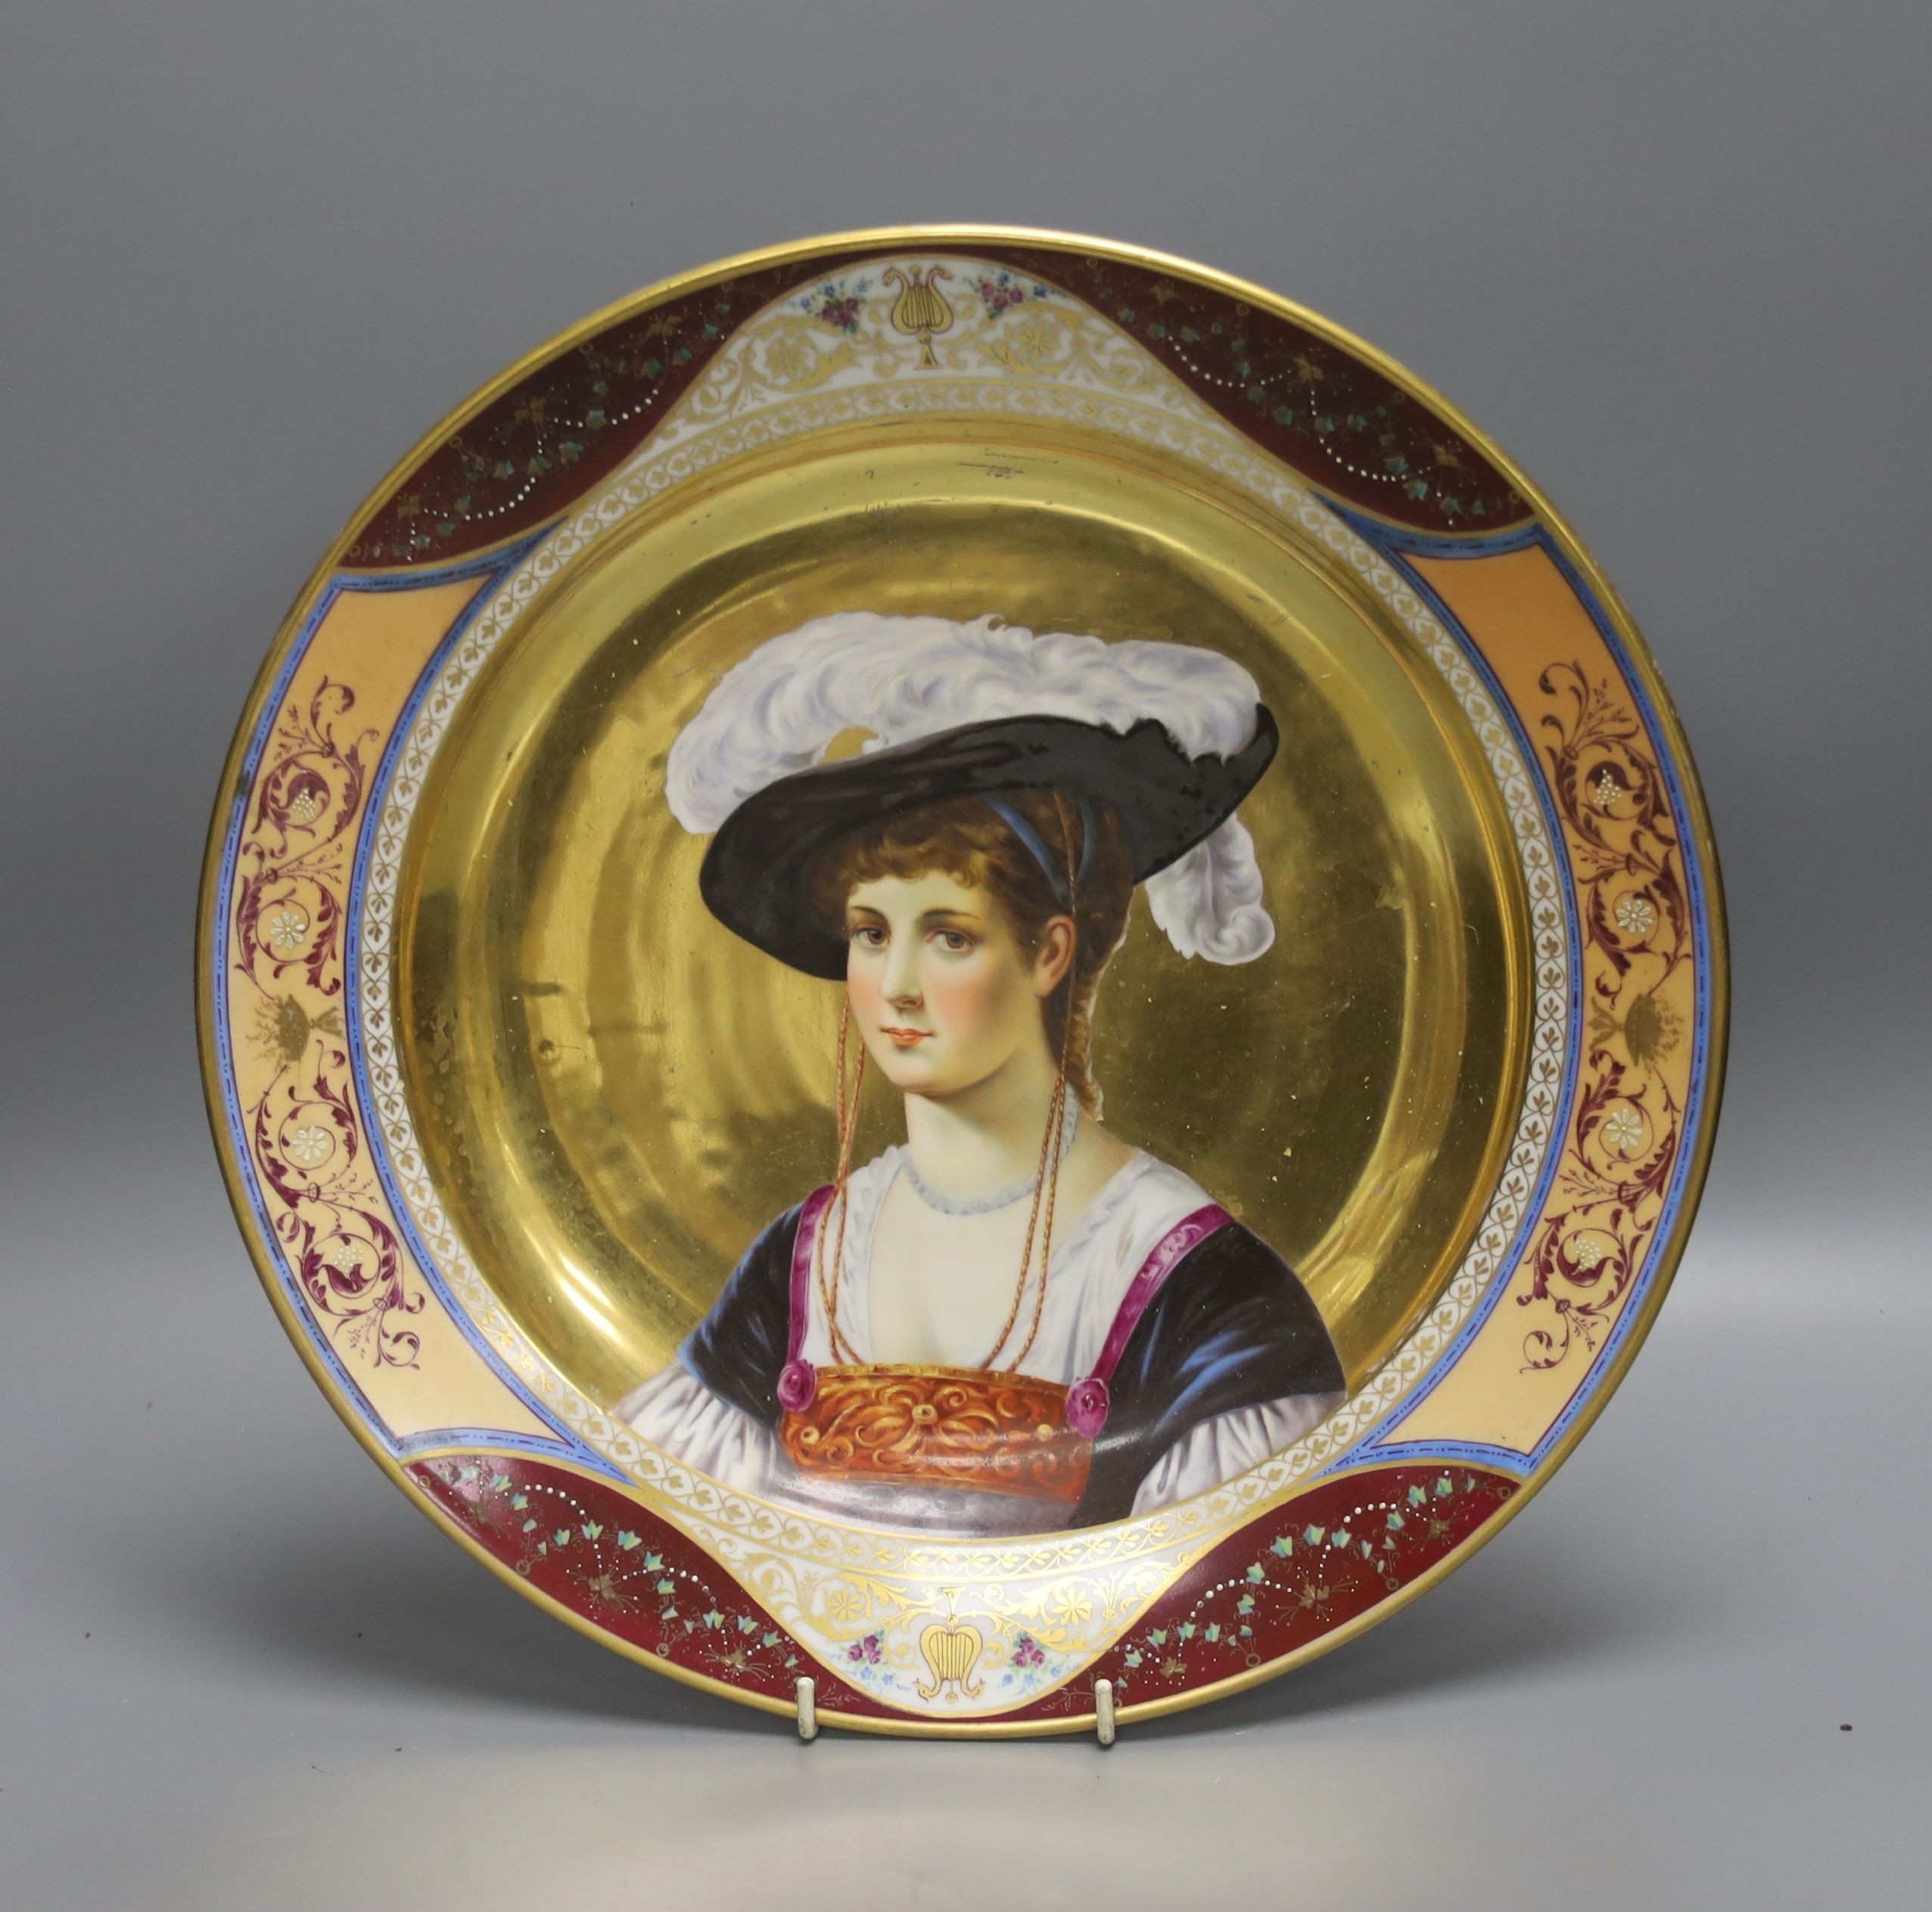 A 19th century Dresden porcelain charger, painted with a portrait of a lady, Augustus Rex mark verso, 36cm diameter.